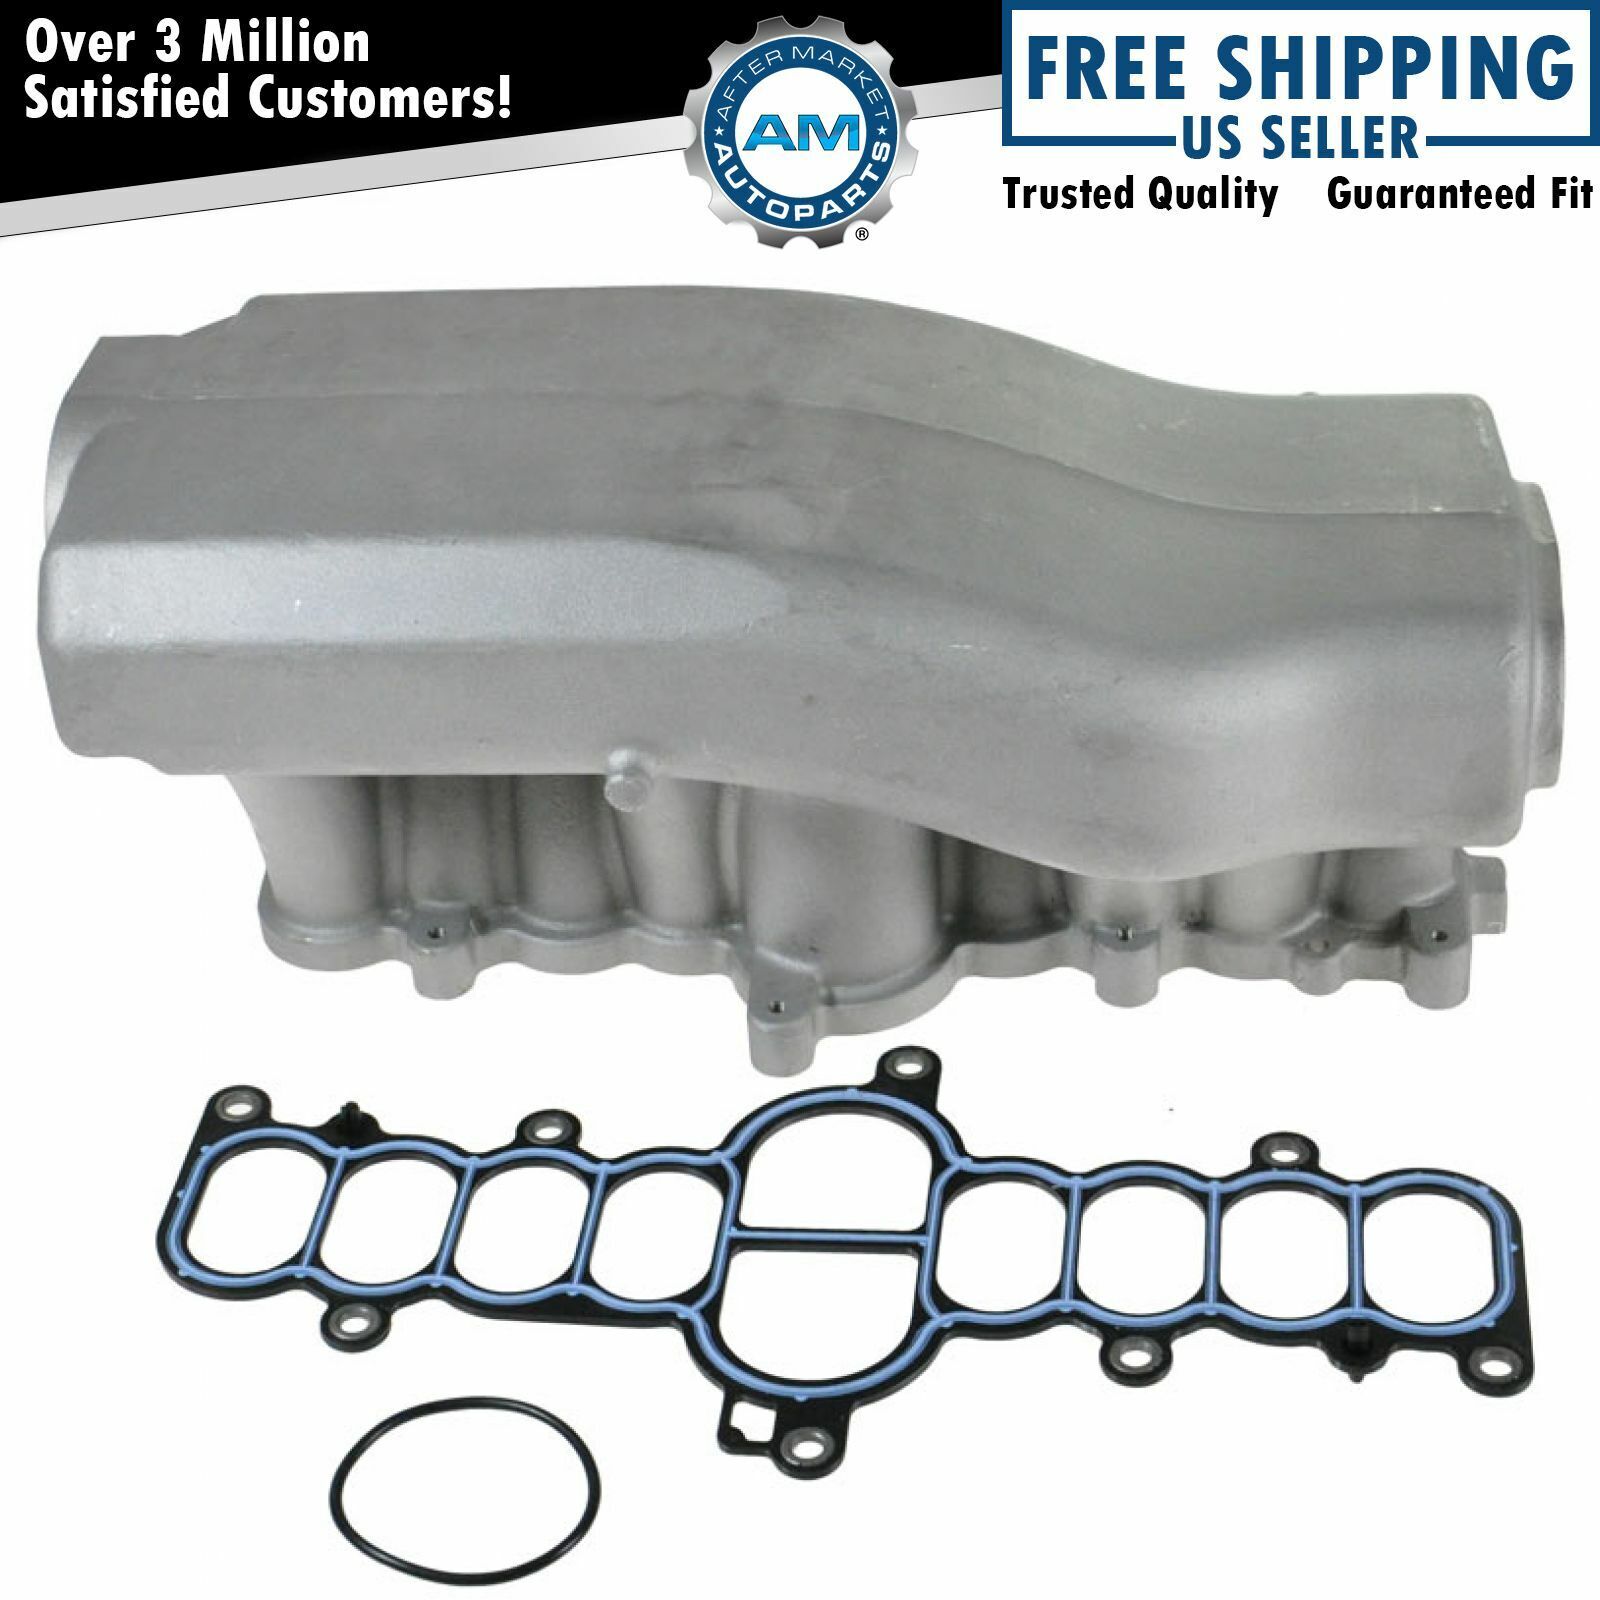 Dorman Lower Intake Manifold for ford Expedition E F 150 250 350